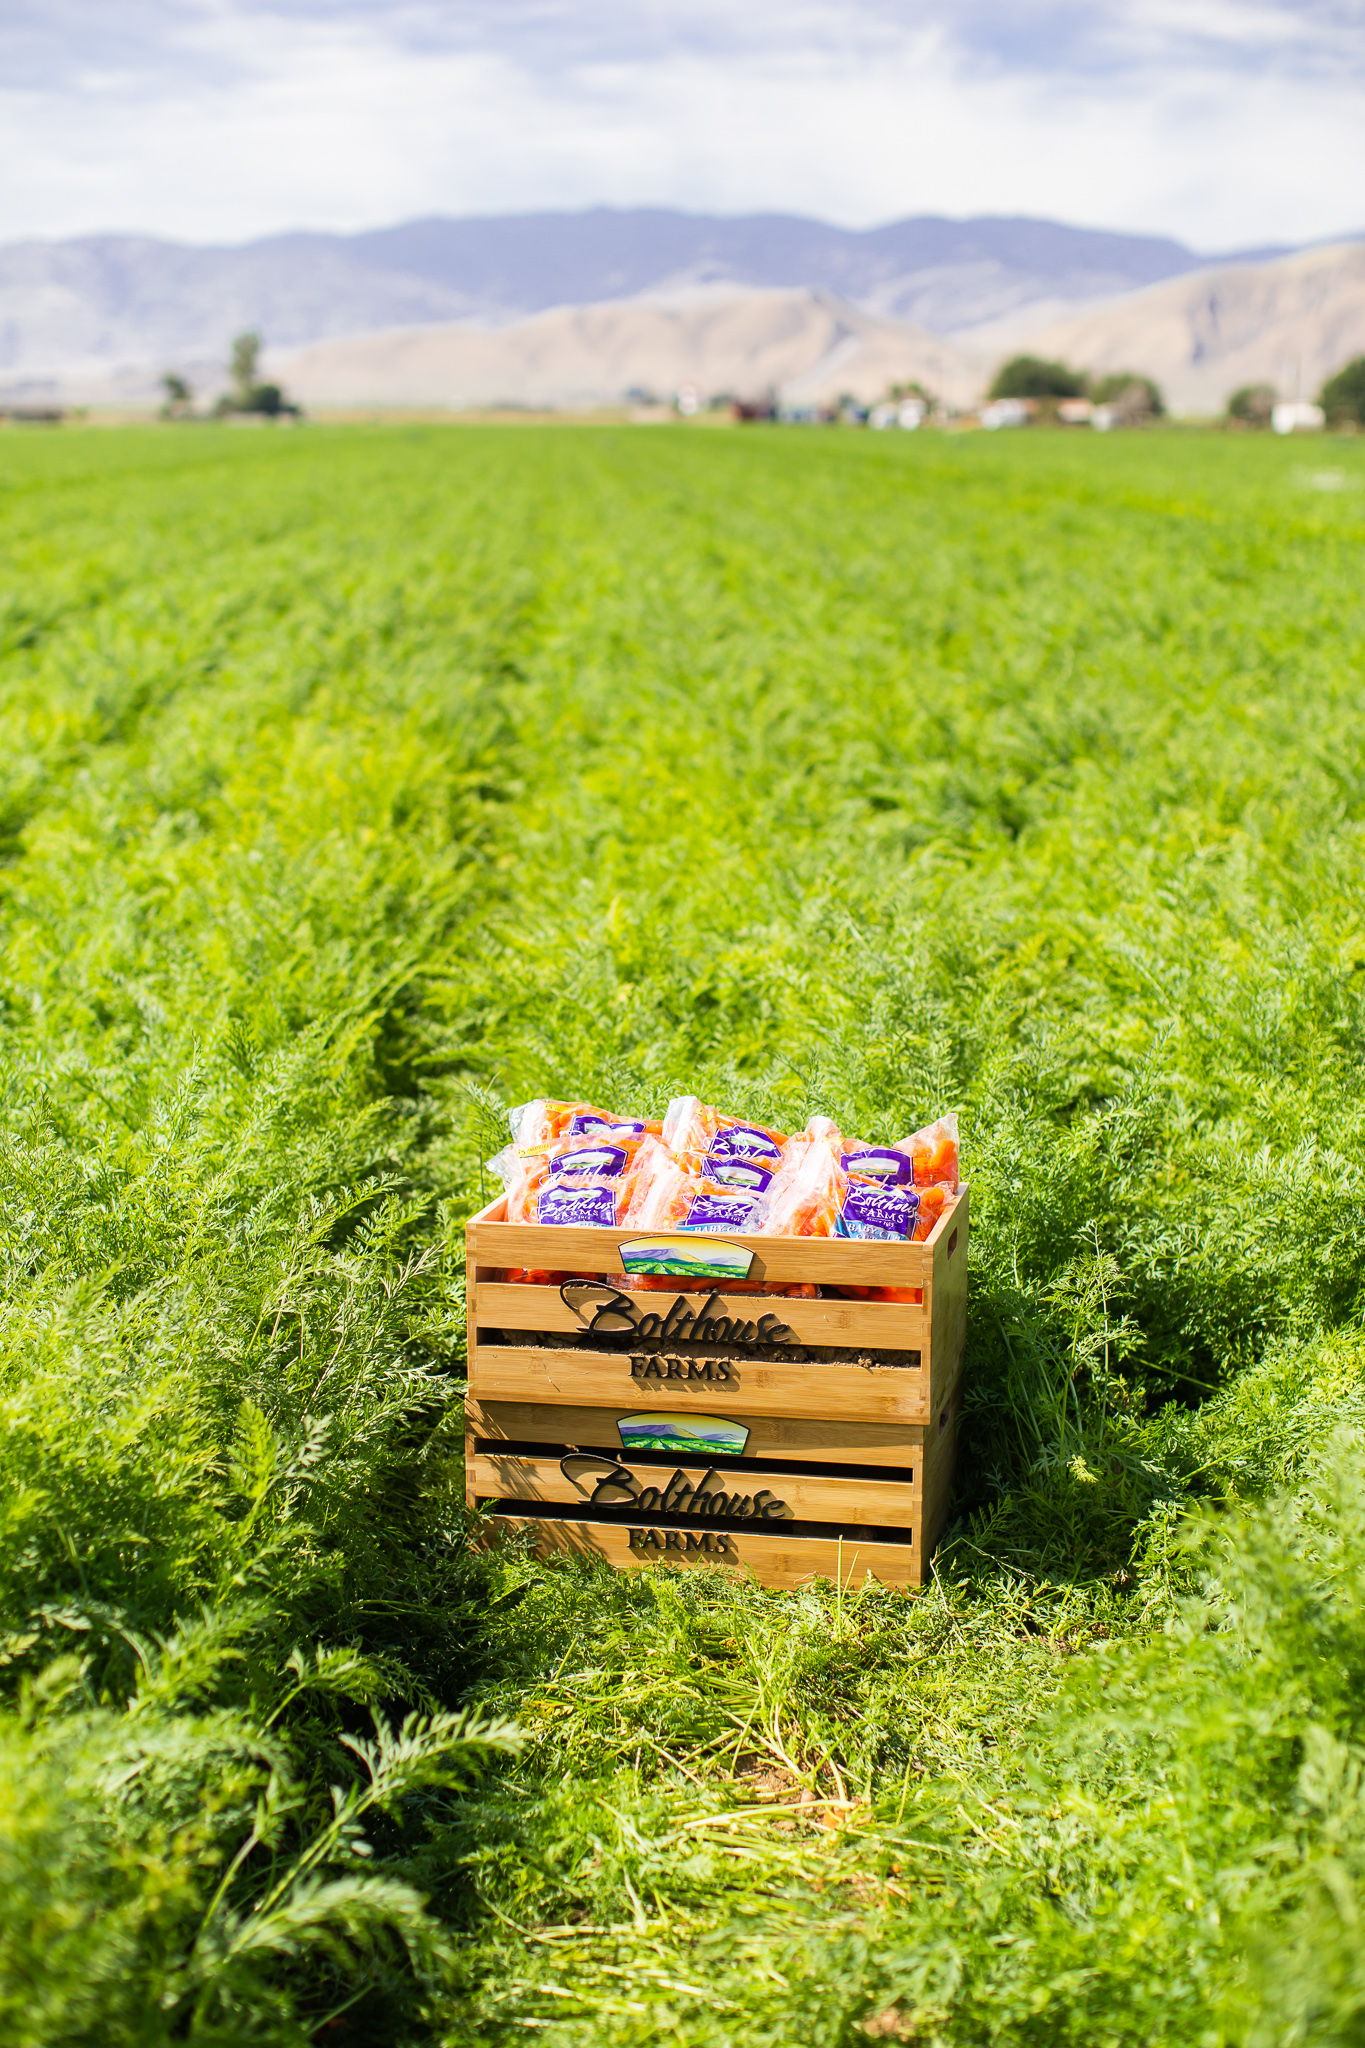 Bolthouse Farms Bakersfield Visit – Our California Trip Recap by popular North Carolina lifestyle blog, Coffee Beans and Bobby Pins: image of a crate full of Bolthouse Farms mini carrots resting in a carrot field at Bolthouse Farms in Bakersfield, California.